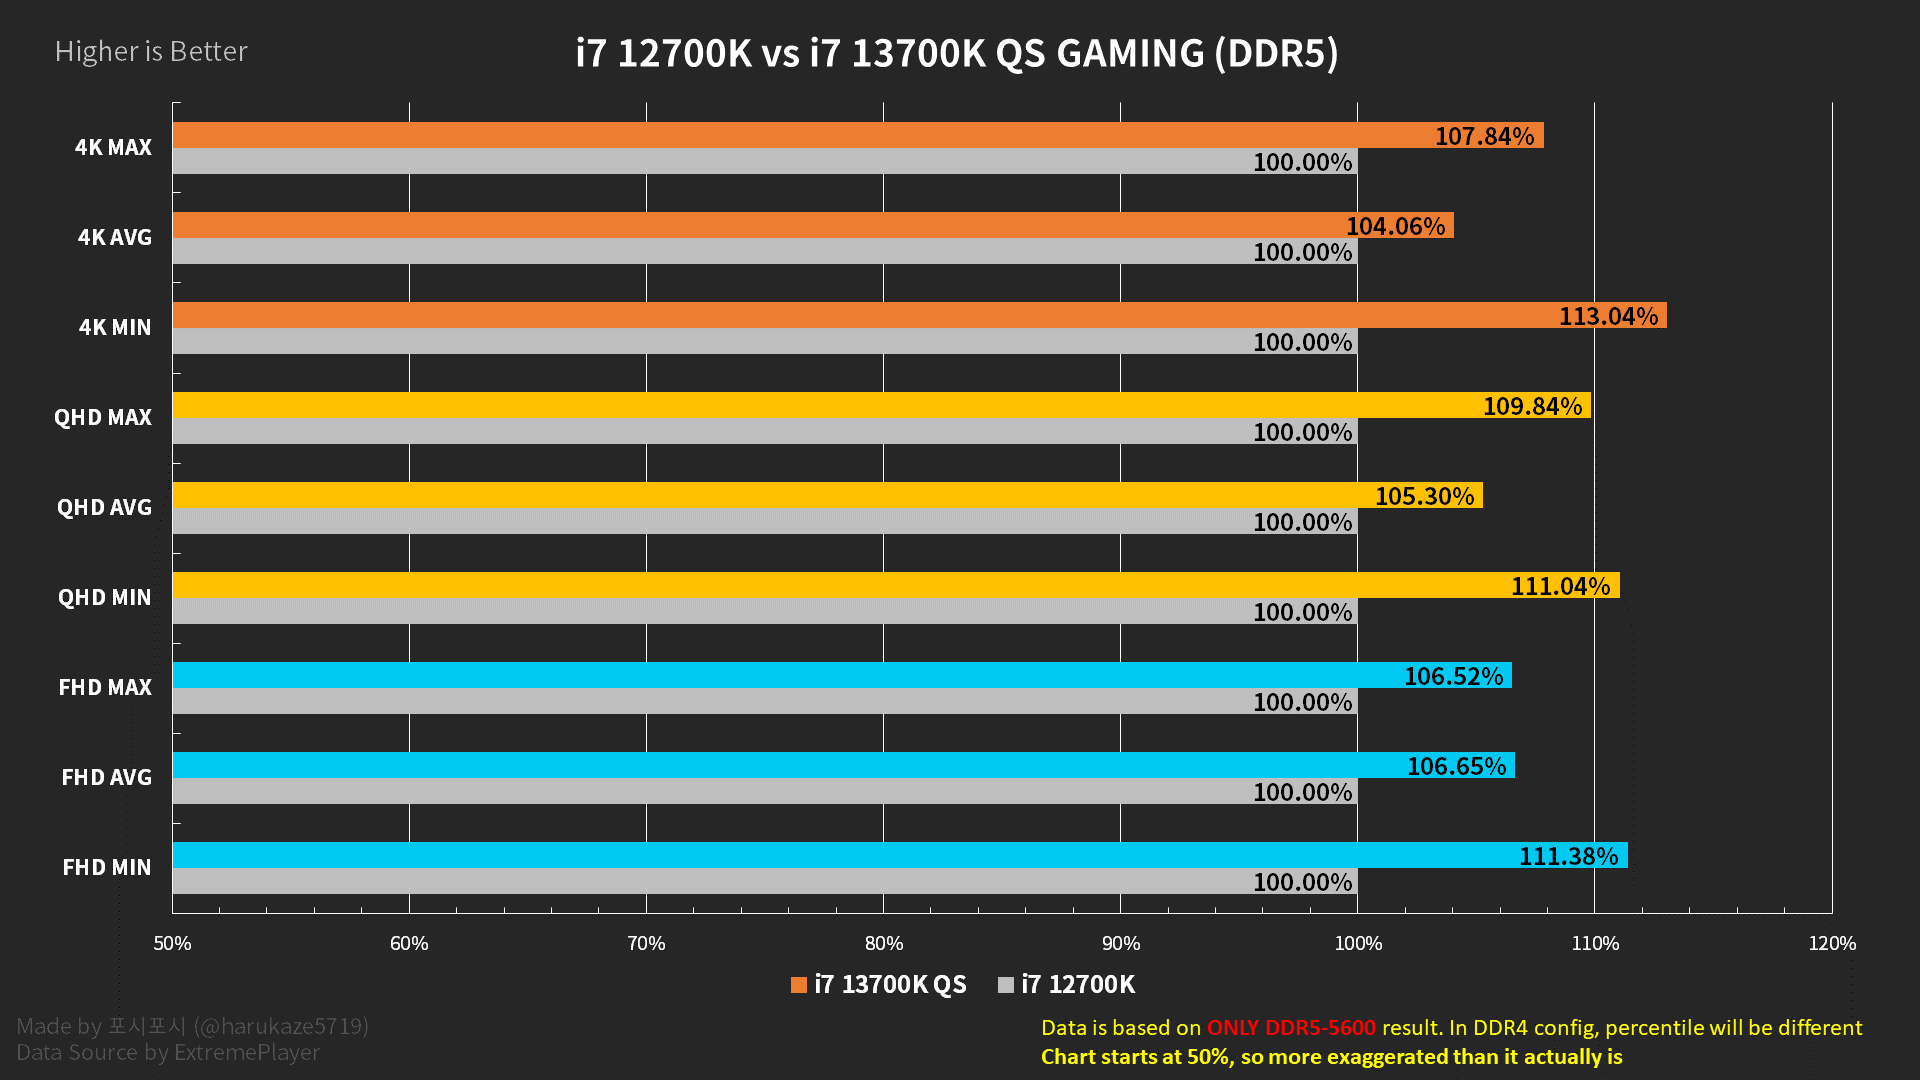 Core i7-12700K vs. Core i7-13700K (ES) with DDR4 and DDR5